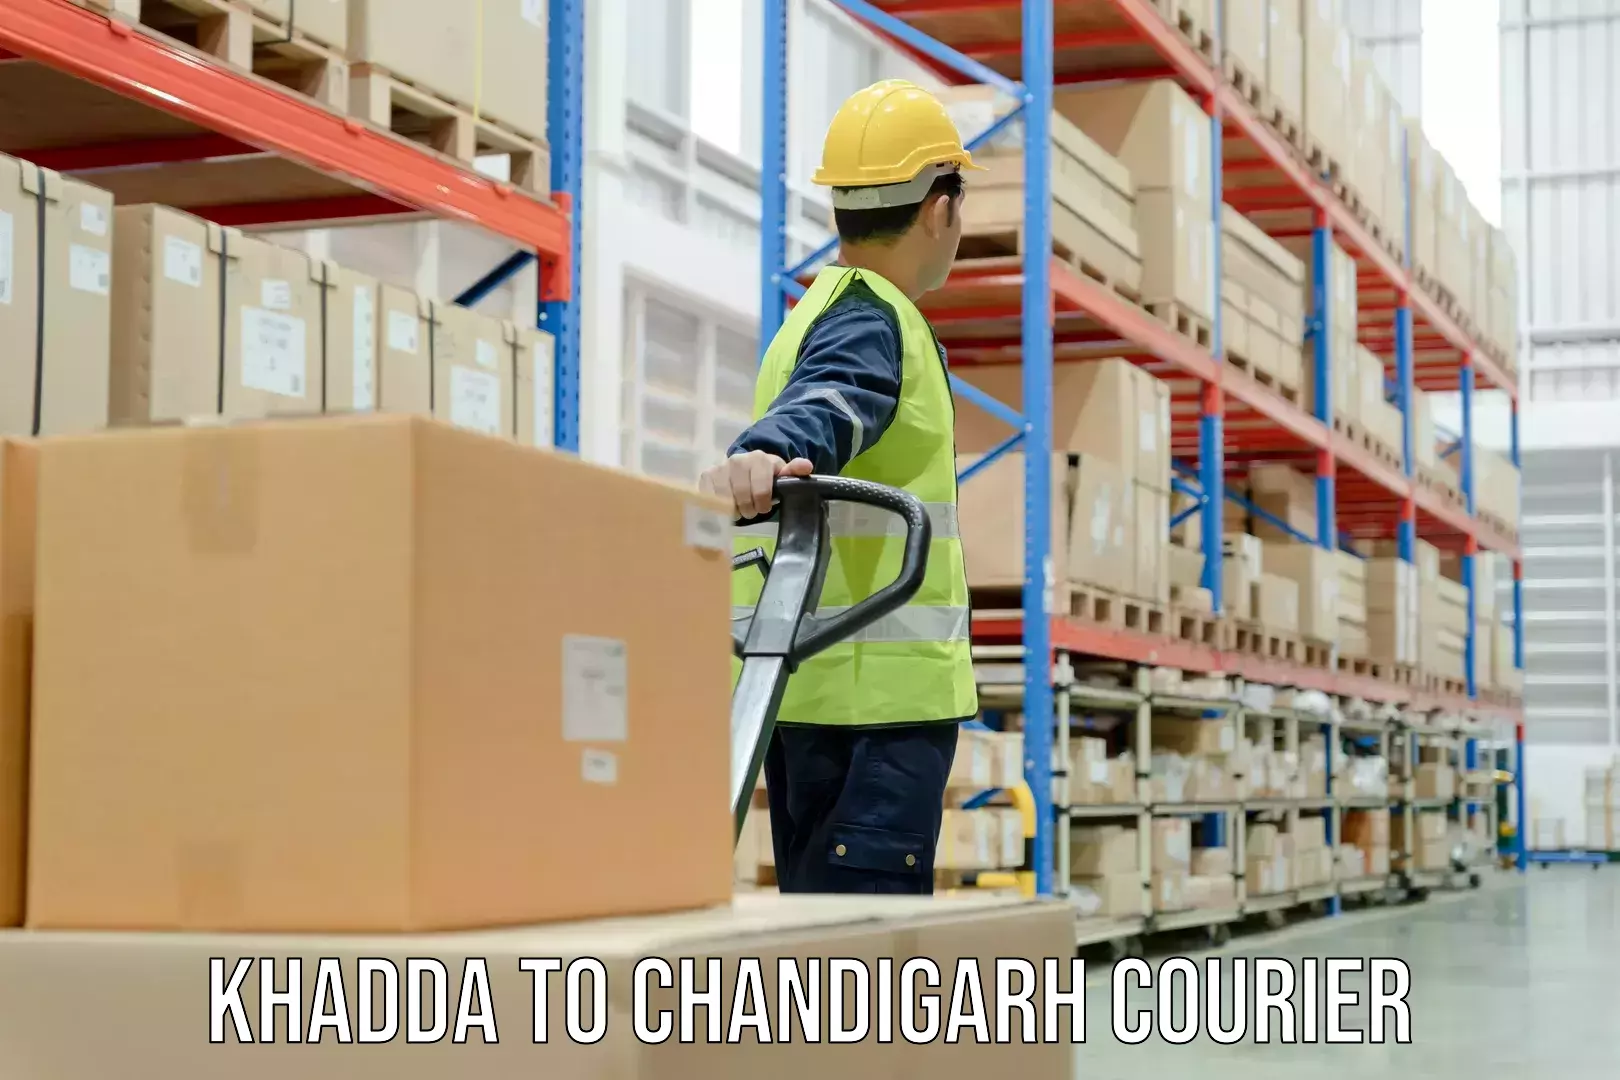 Express delivery capabilities Khadda to Chandigarh